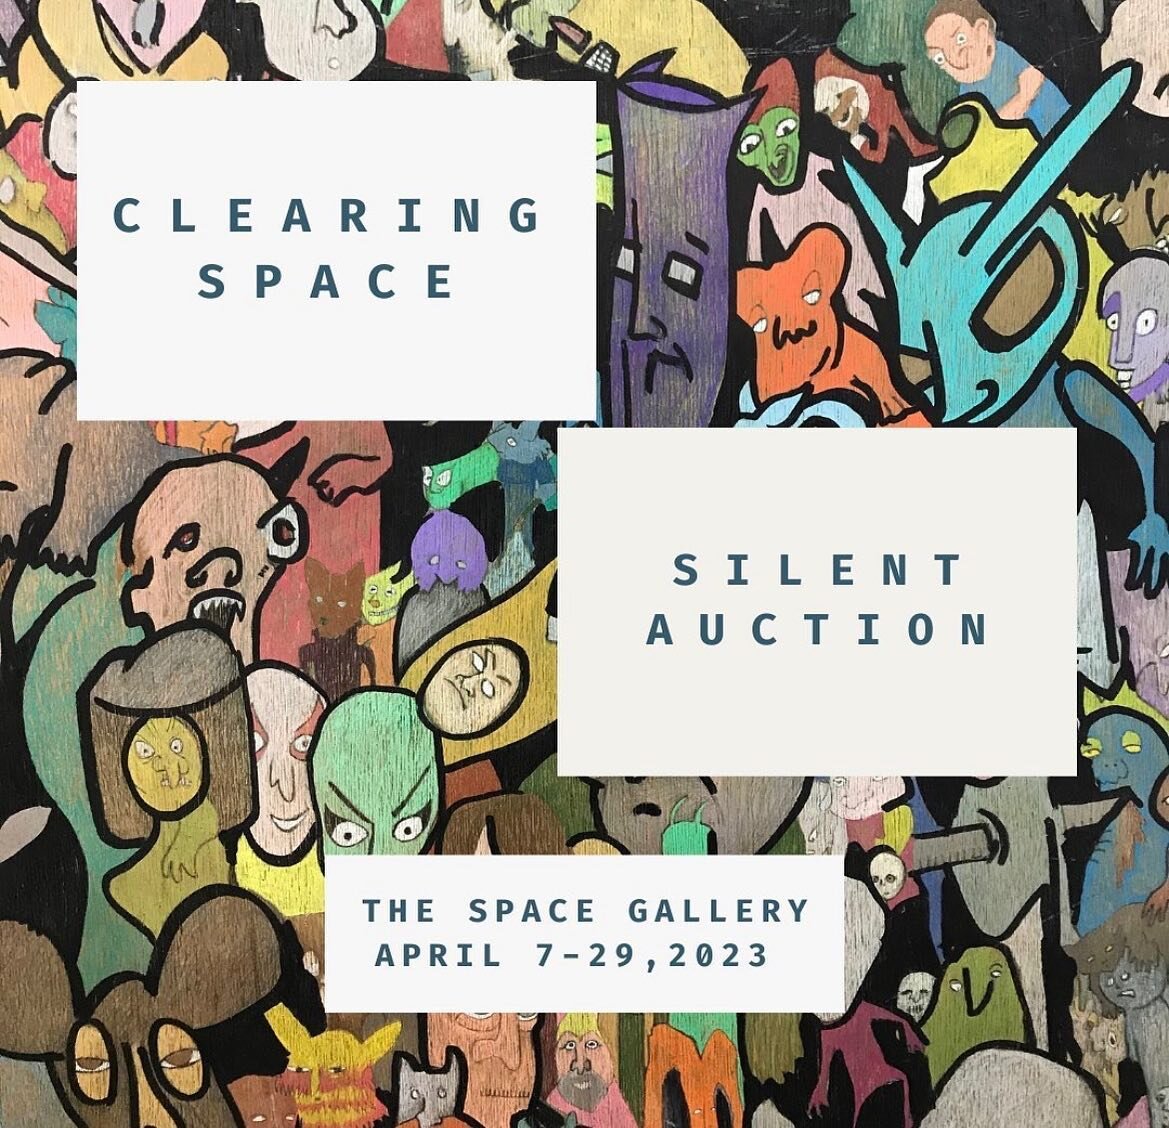 This month @spacegalleryvt hosts 'Clearing Space', where April spring studio cleaning = a silent auction on wonderful donated, acquired, and lost artwork that is searching for its new home. Join @spacegalleryvt on this First Friday, April 7 from 5-9p